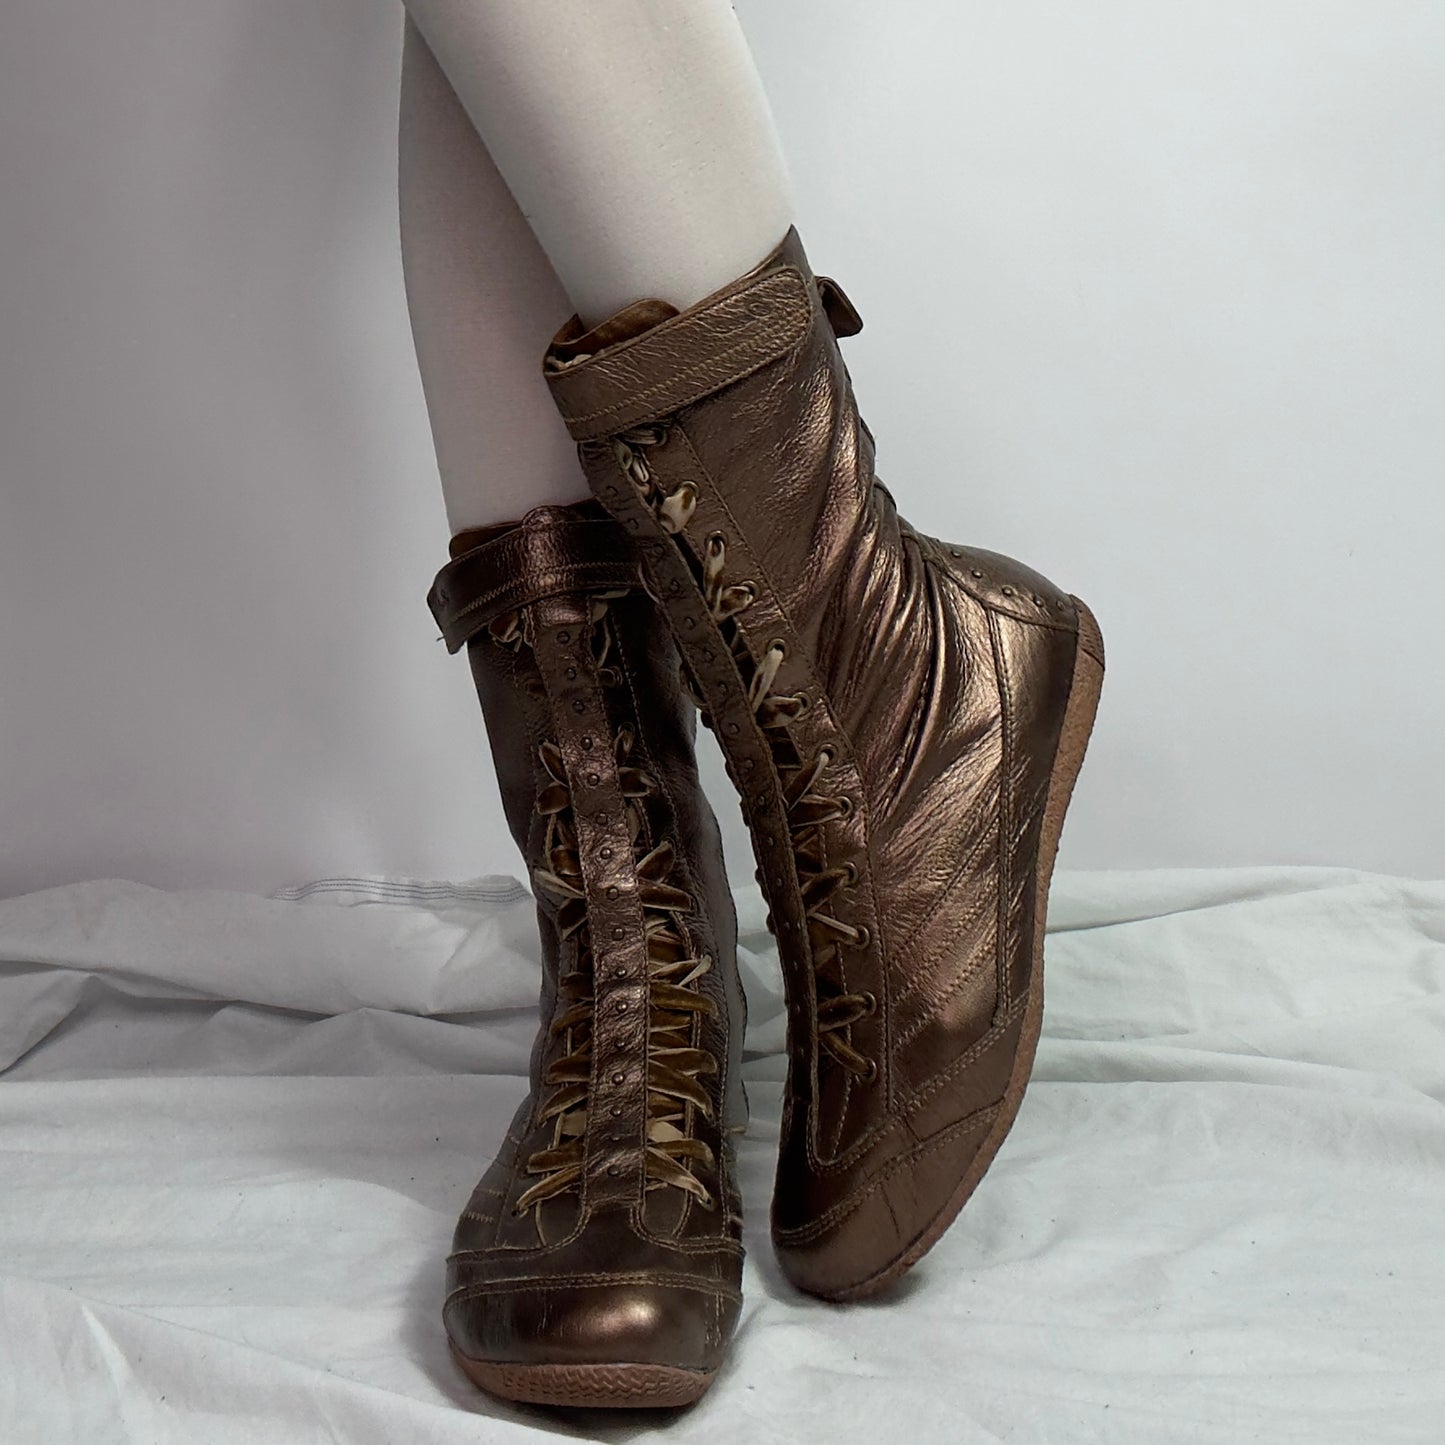 Diesel Vintage Boxing Lace up Boots